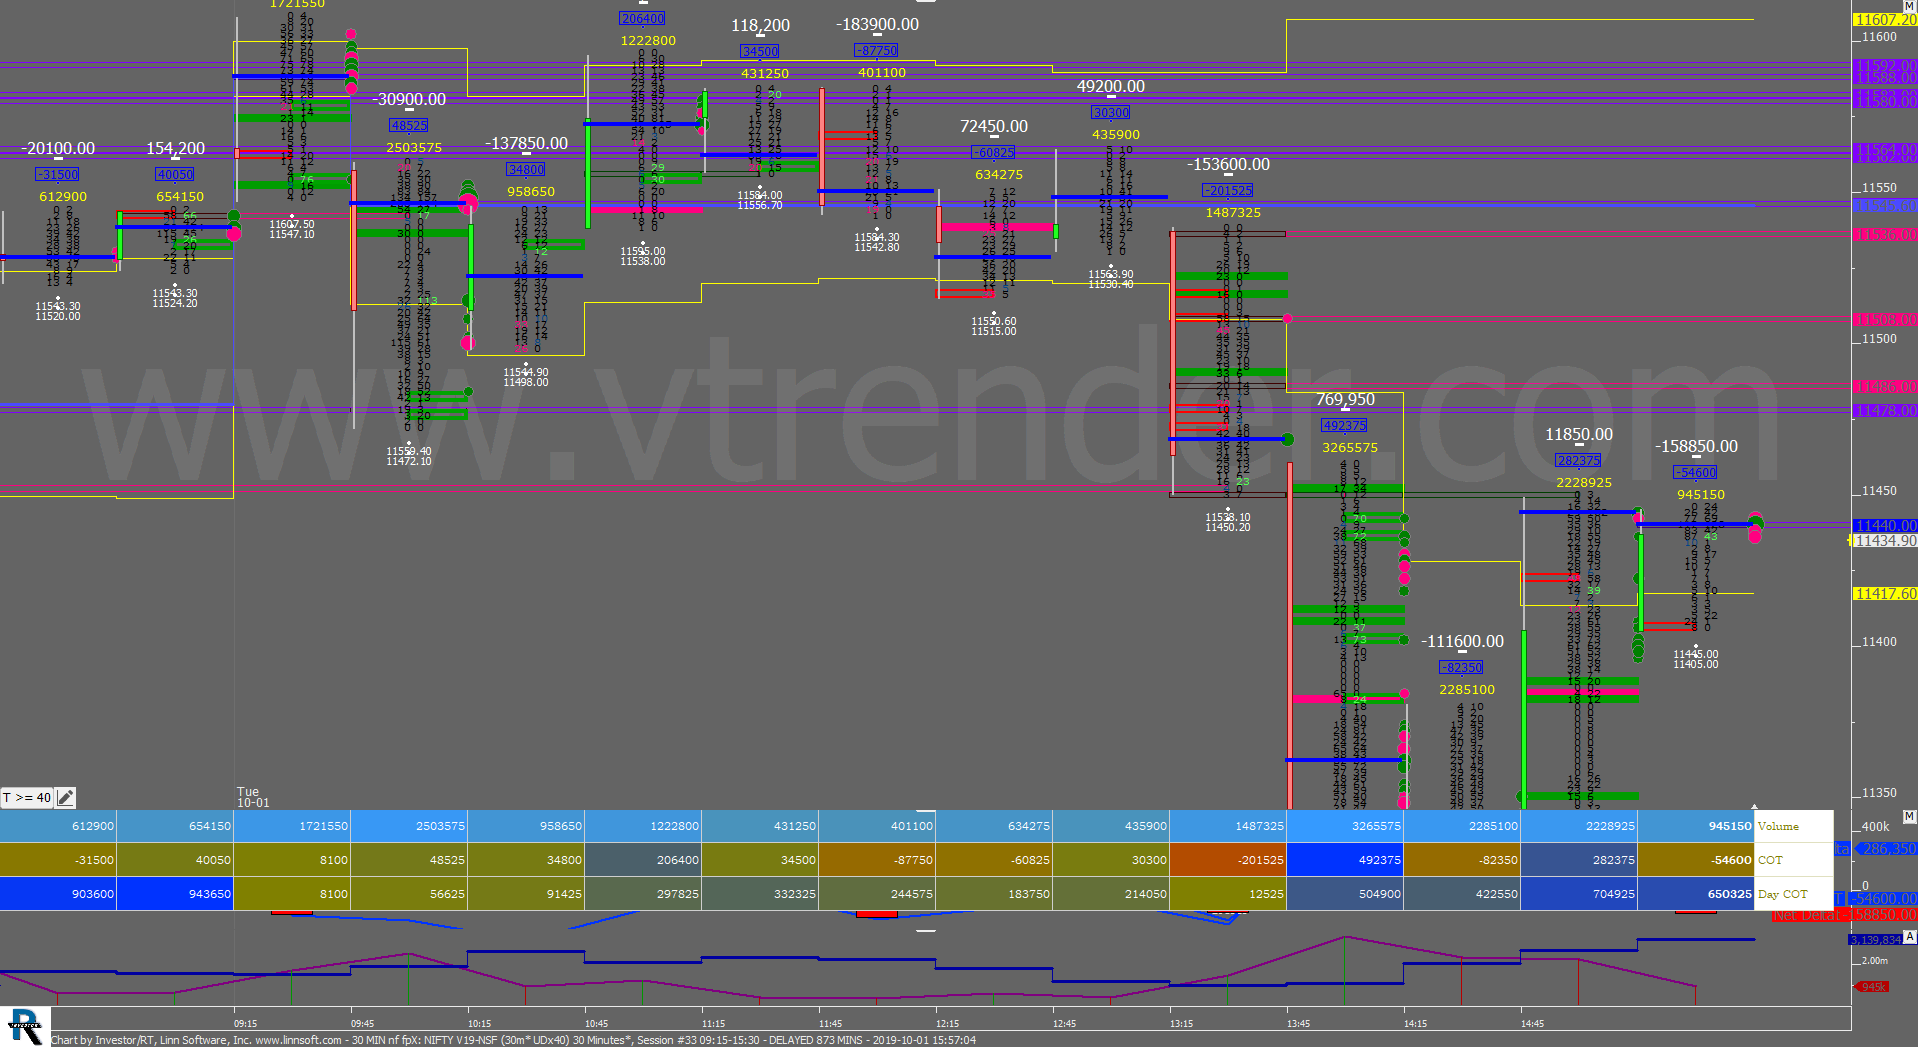 30 Min Nf Fpx Order Flow Charts Dated 1St Oct Banknifty Futures, Day Trading, Intraday Trading, Intraday Trading Strategies, Nifty Futures, Order Flow Analysis, Support And Resistance, Trading Strategies, Volume Profile Trading